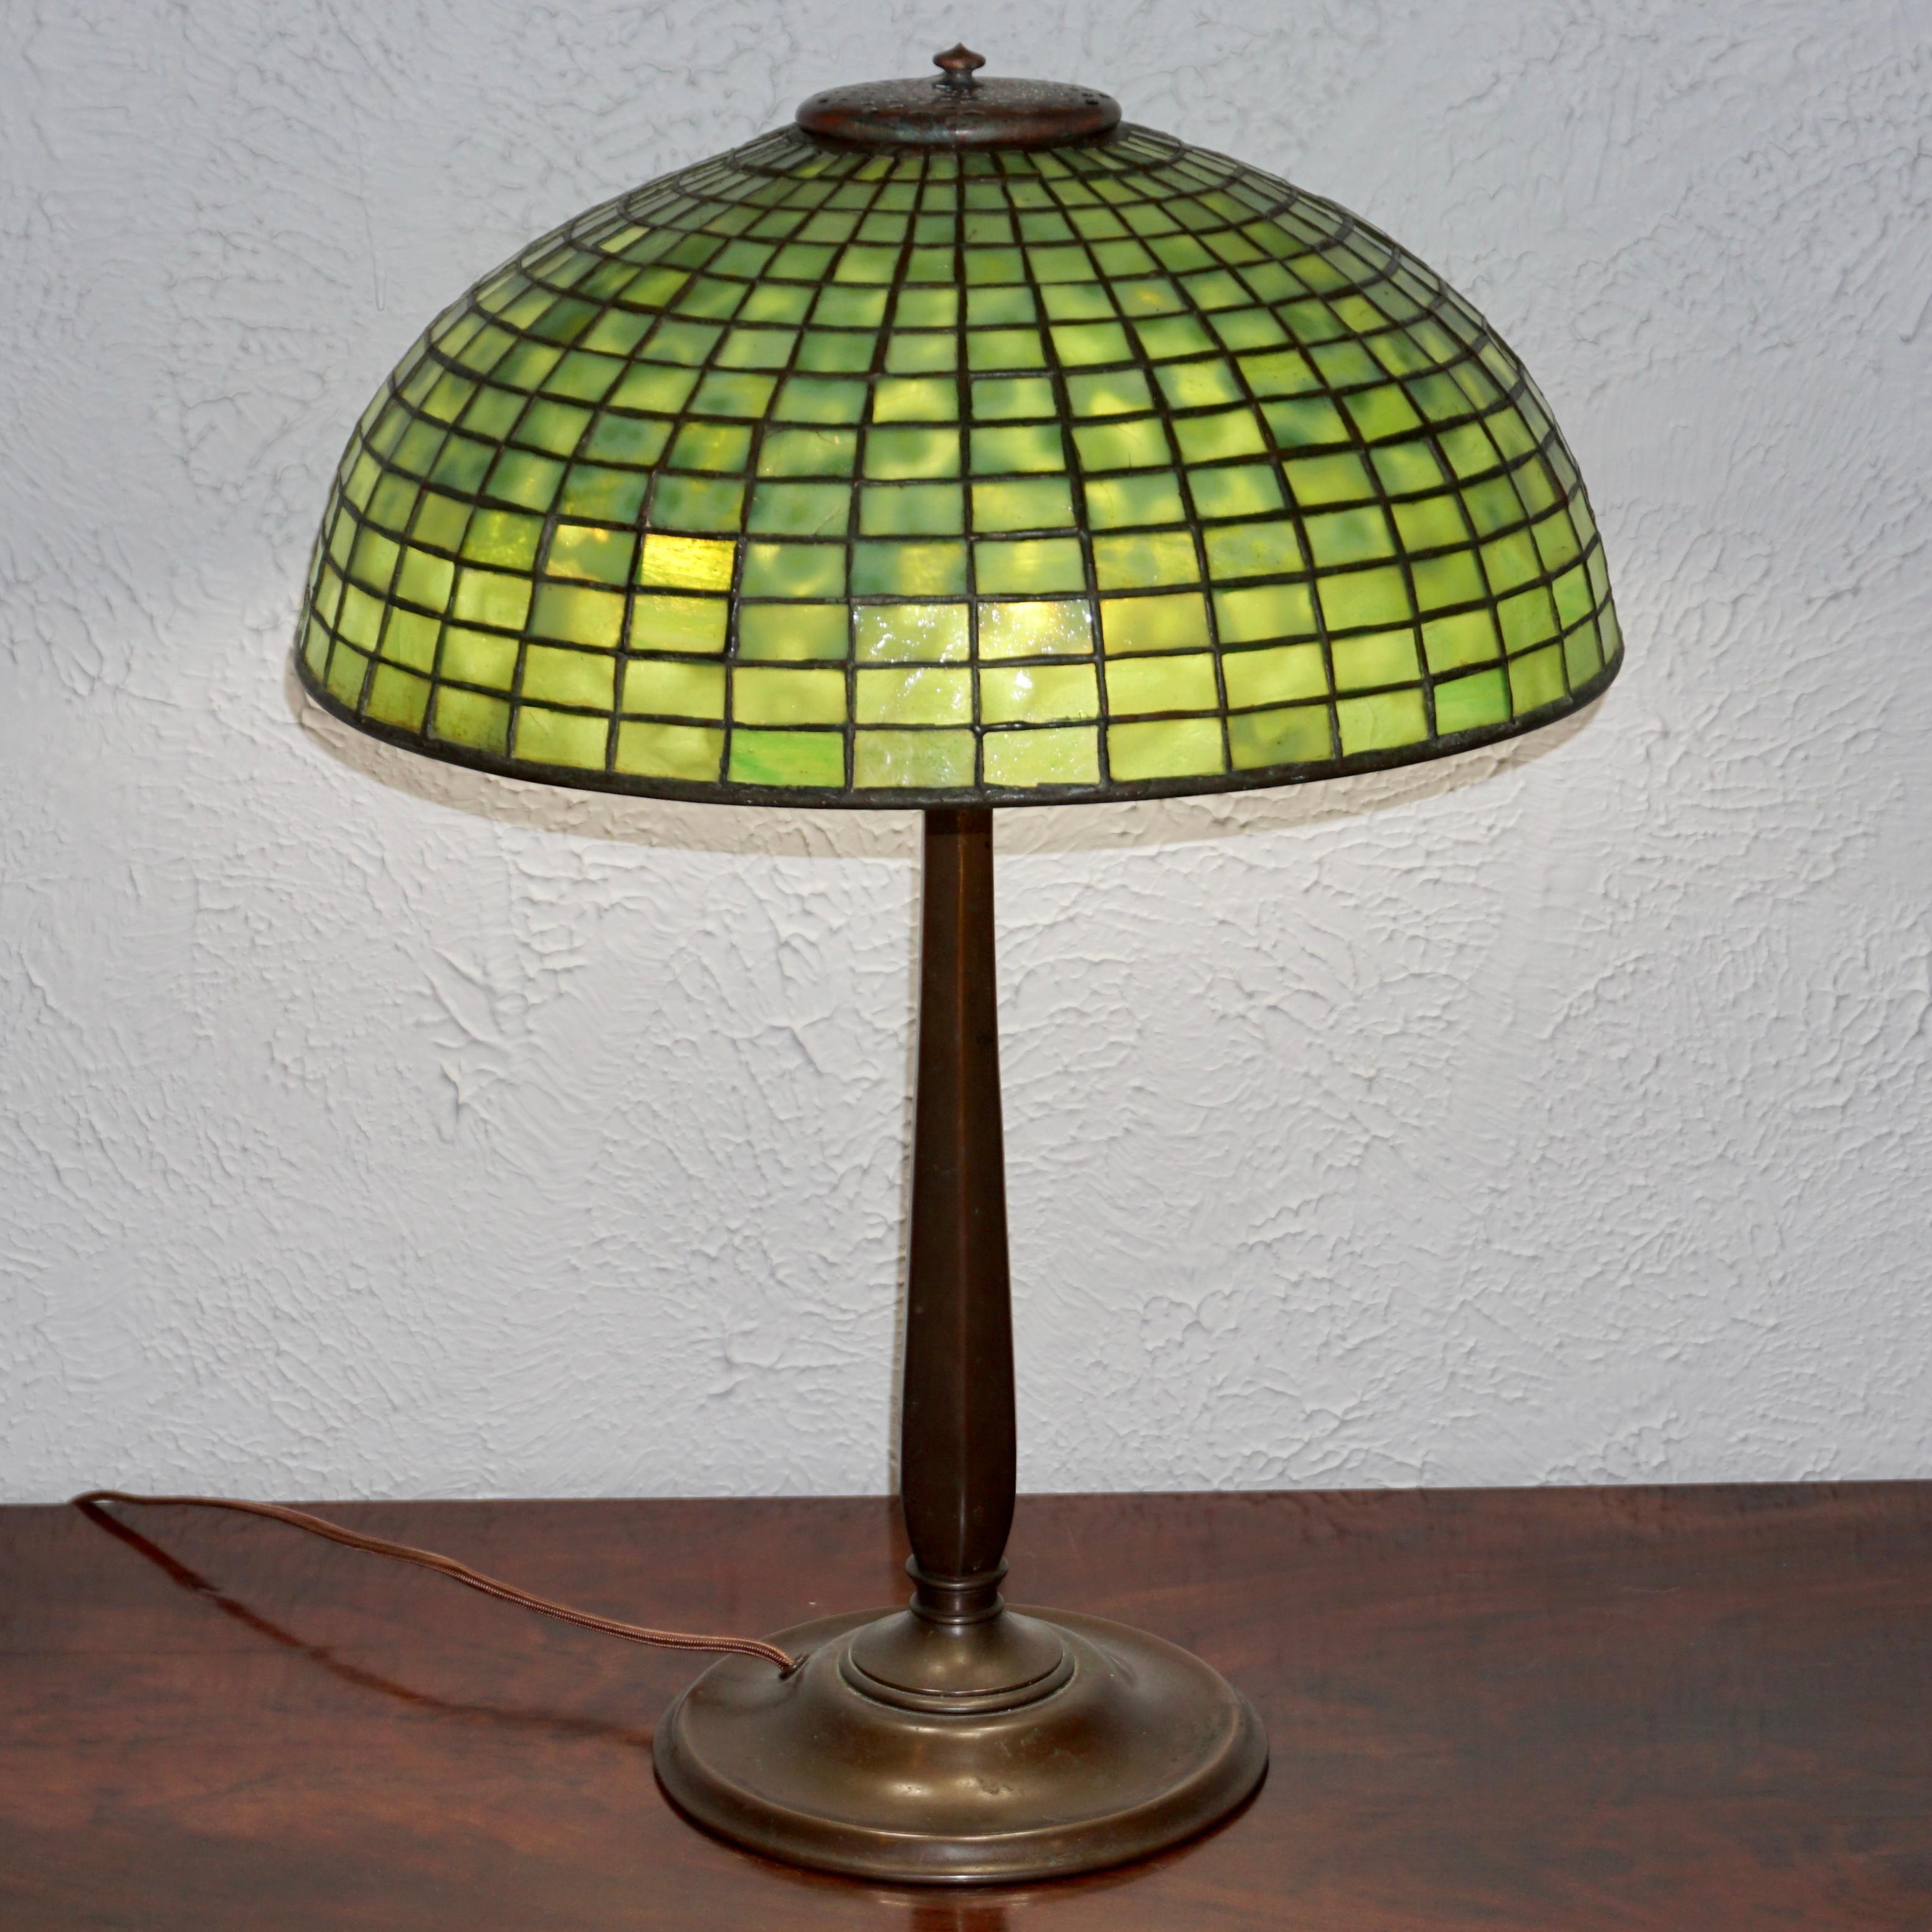 A great Geometric Tiffany Studios table lamp, circa 1910

From the Art Nouveau era comes this simple yet elegant Tiffany Studios lamp. The shade with monochromatic glass panels align to make a geometric pattern emitting a wonderful warm green hue